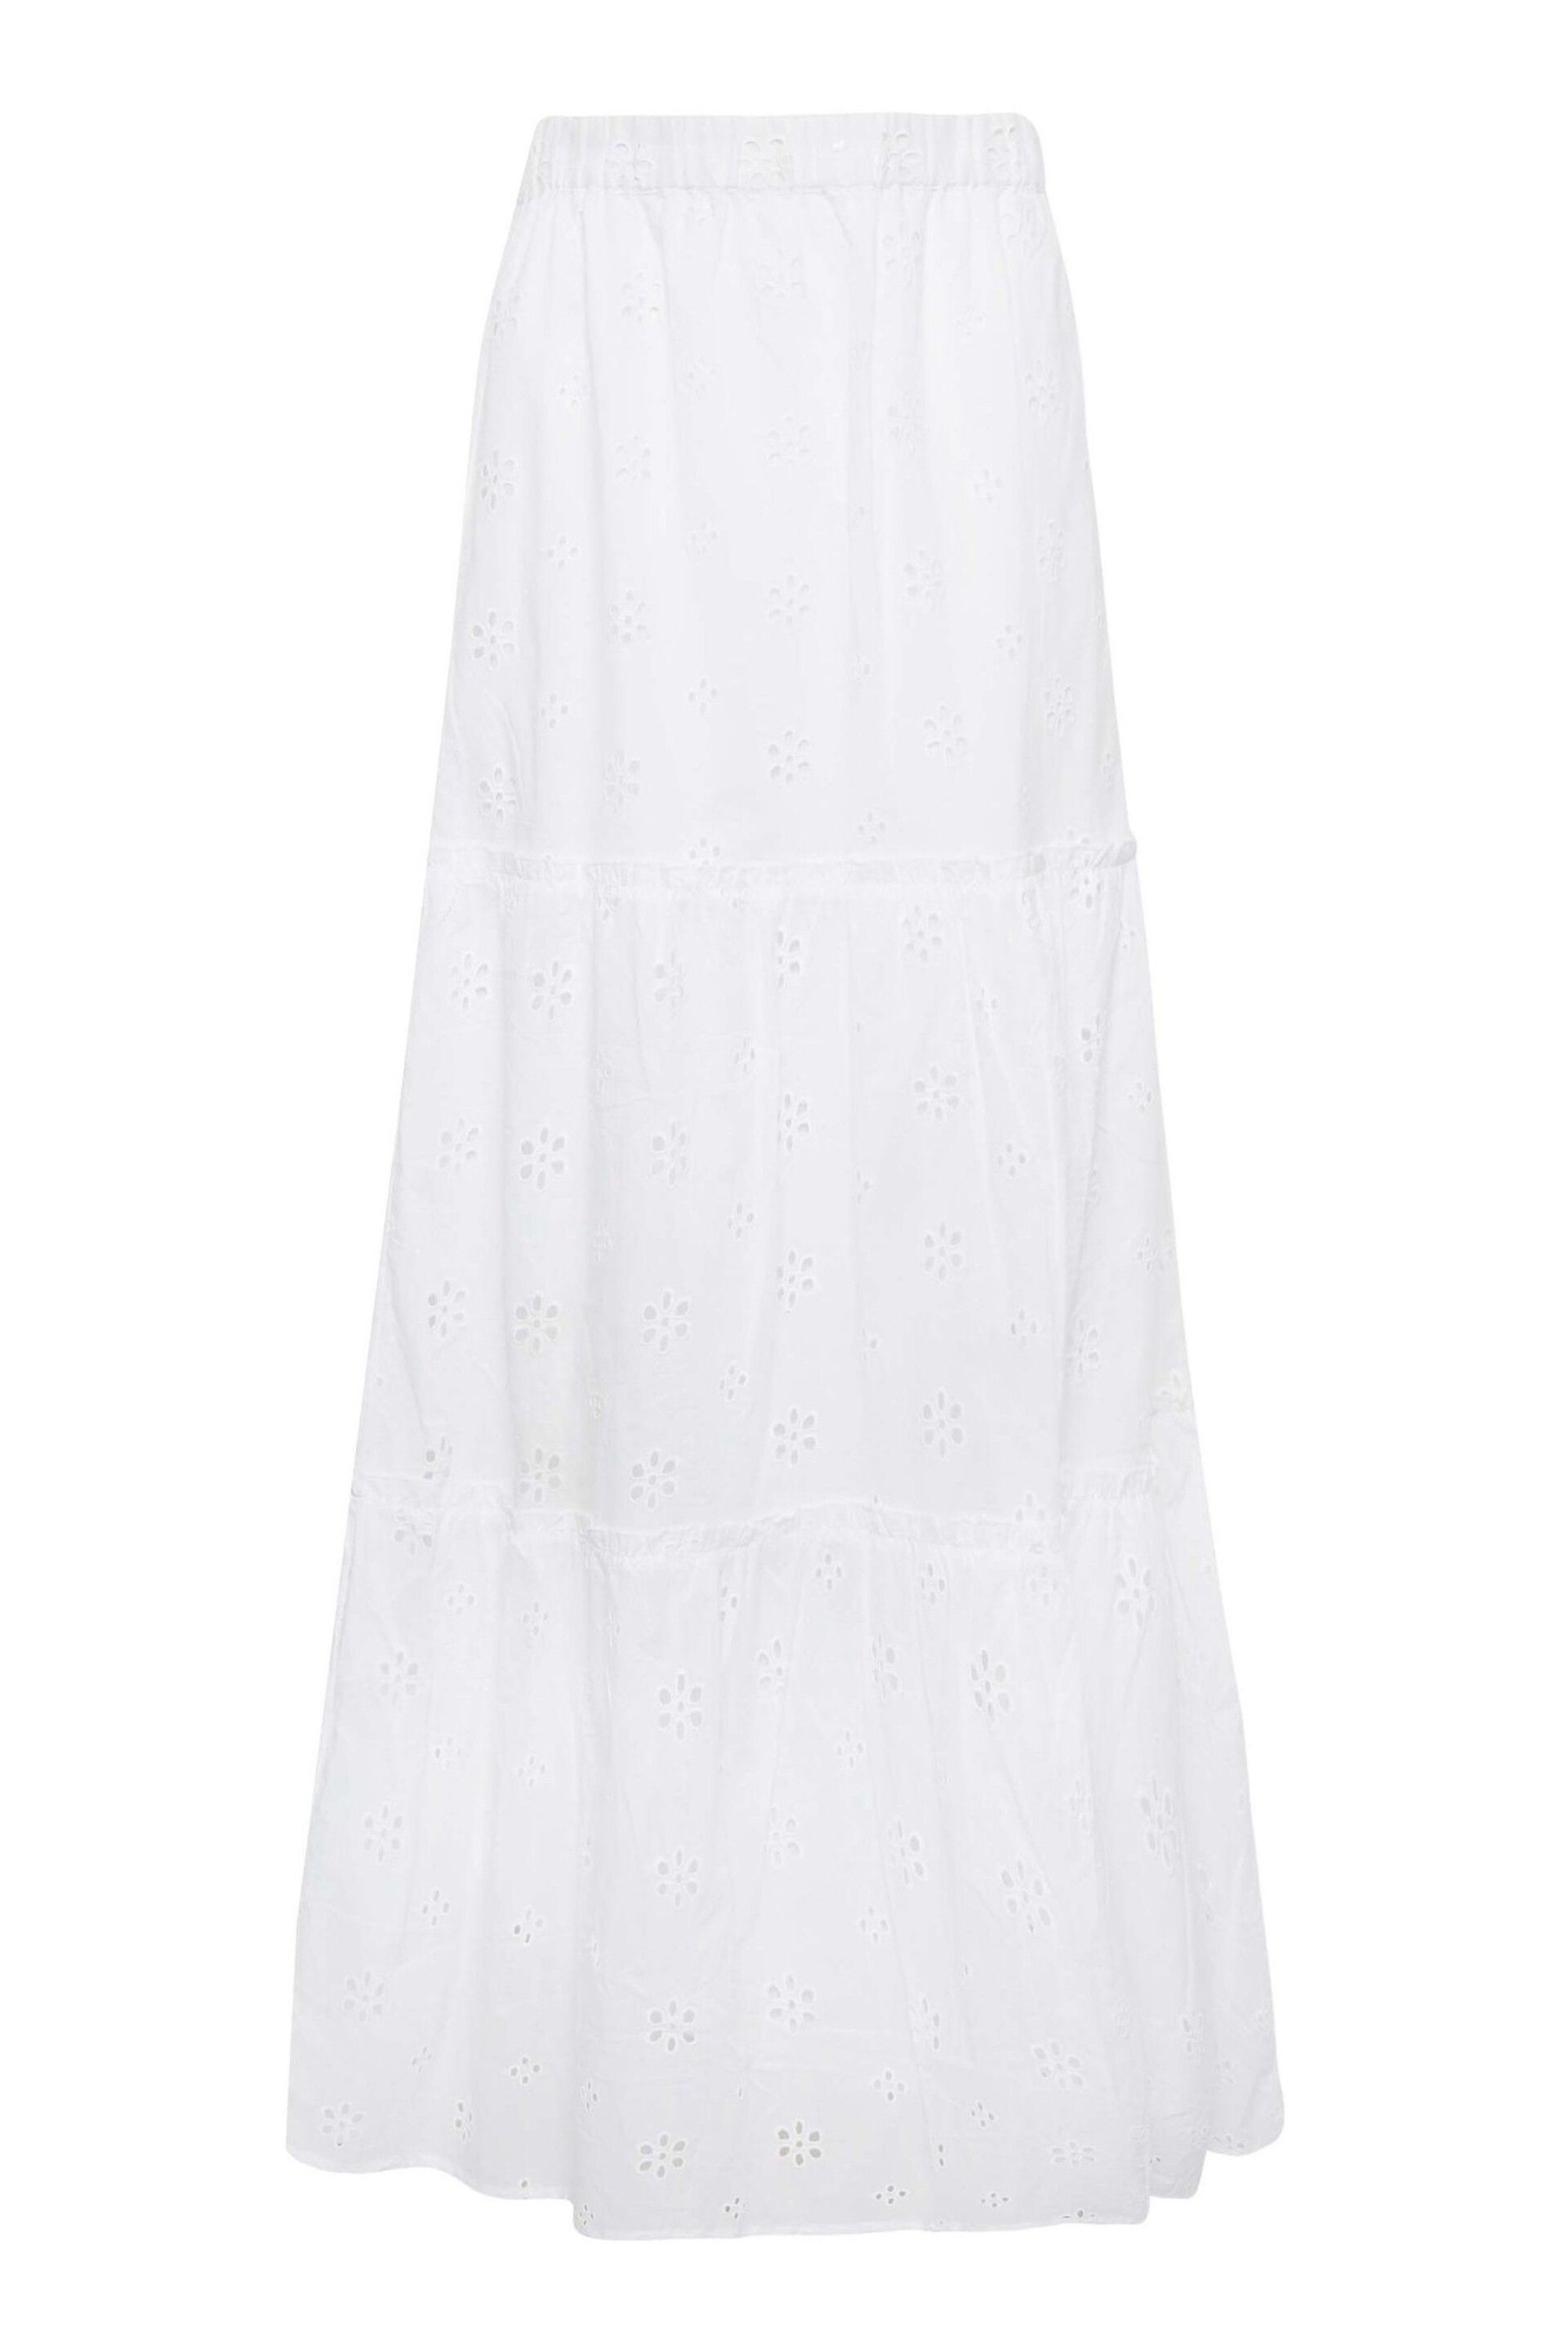 Long Tall Sally White Broderie Anglaise Tiered Maxi Skirt - Image 3 of 4